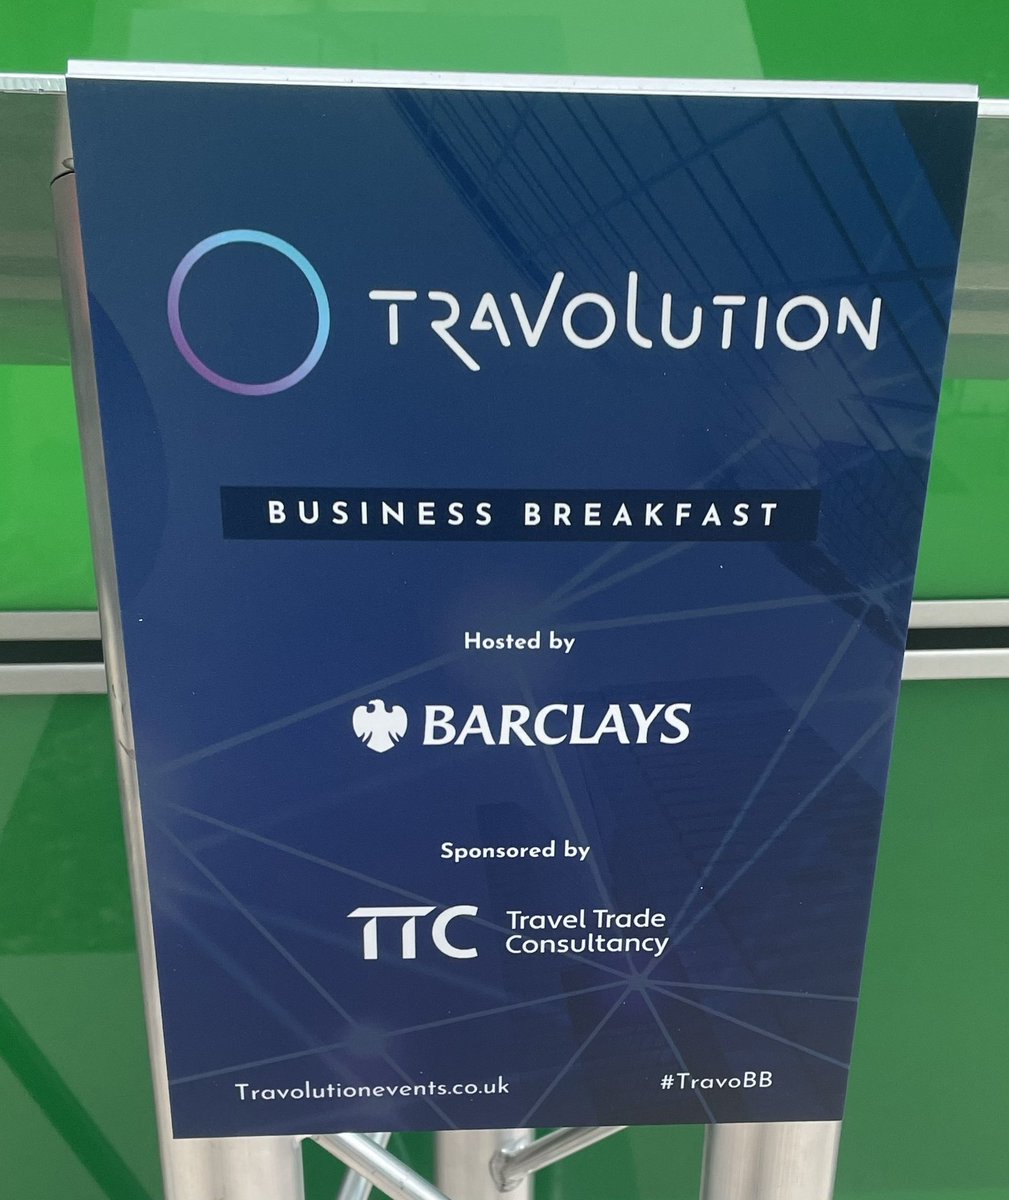 All ready to hear an insightful panel session on the impact of strategy planning in 2023. 

@travolution #travobb